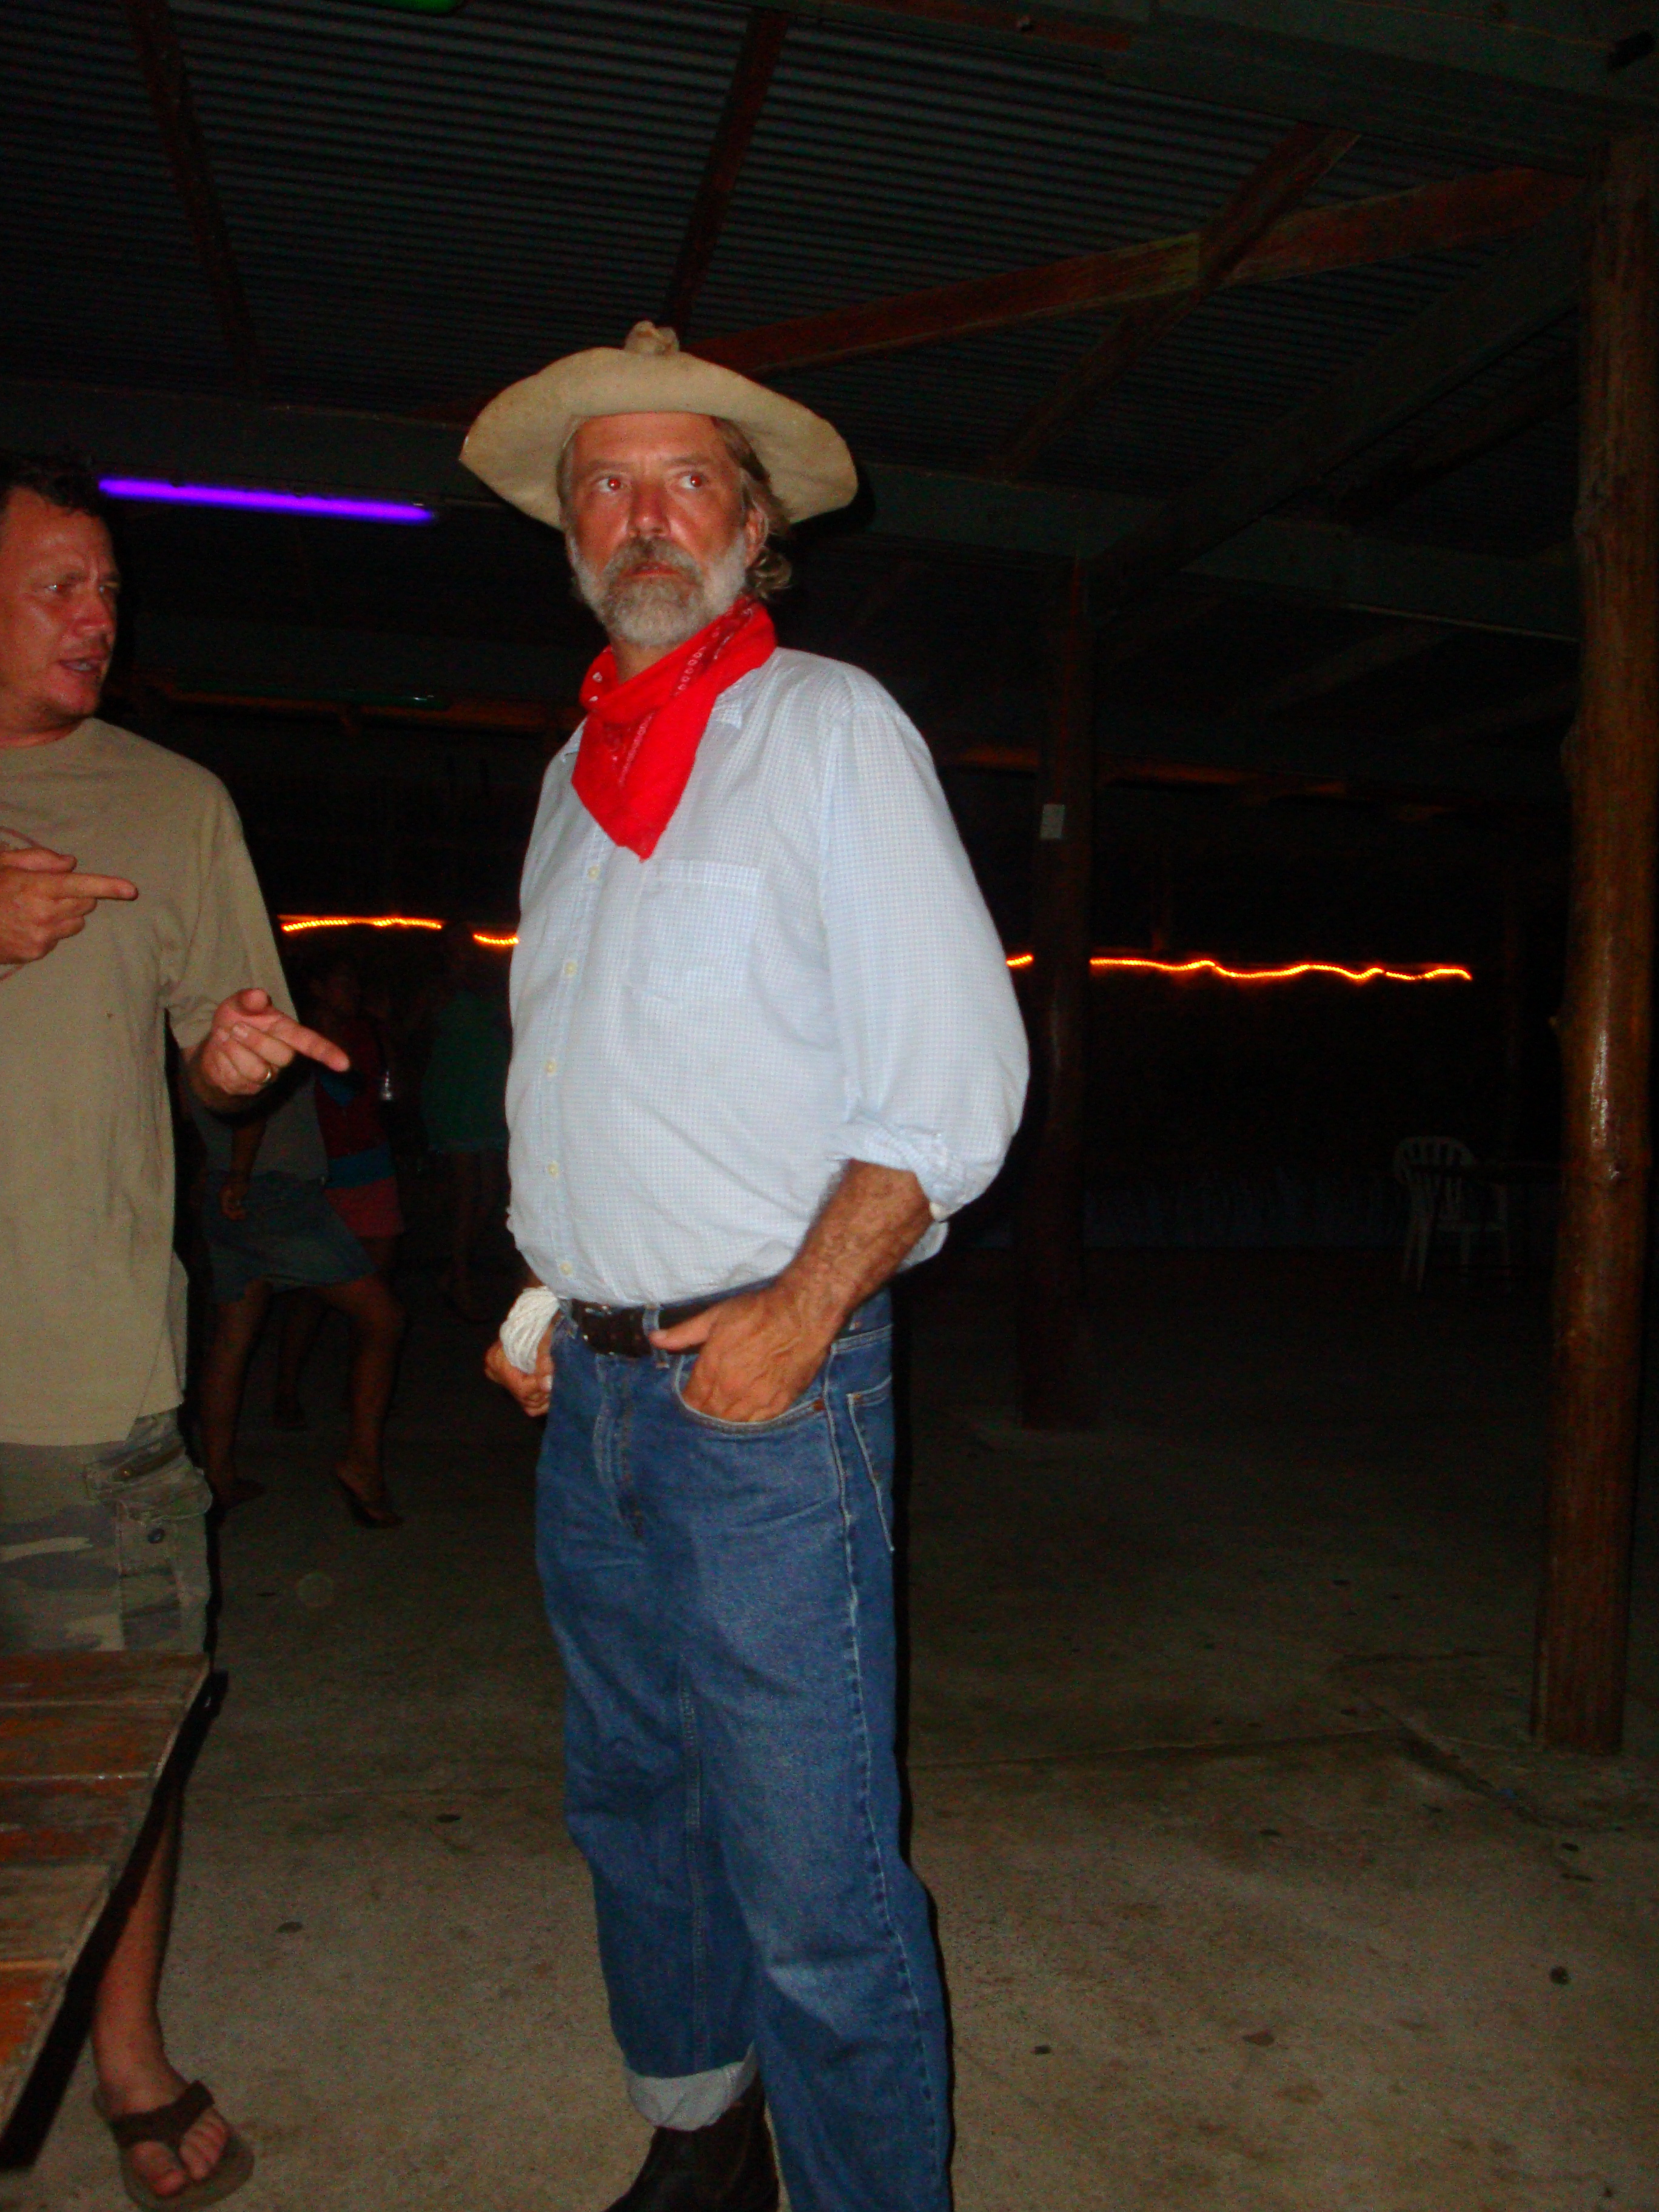 Aitutaki, Cook Islands. Crew told me it was cowboy western costume night at the restaurant. I was the only one that dressed up.